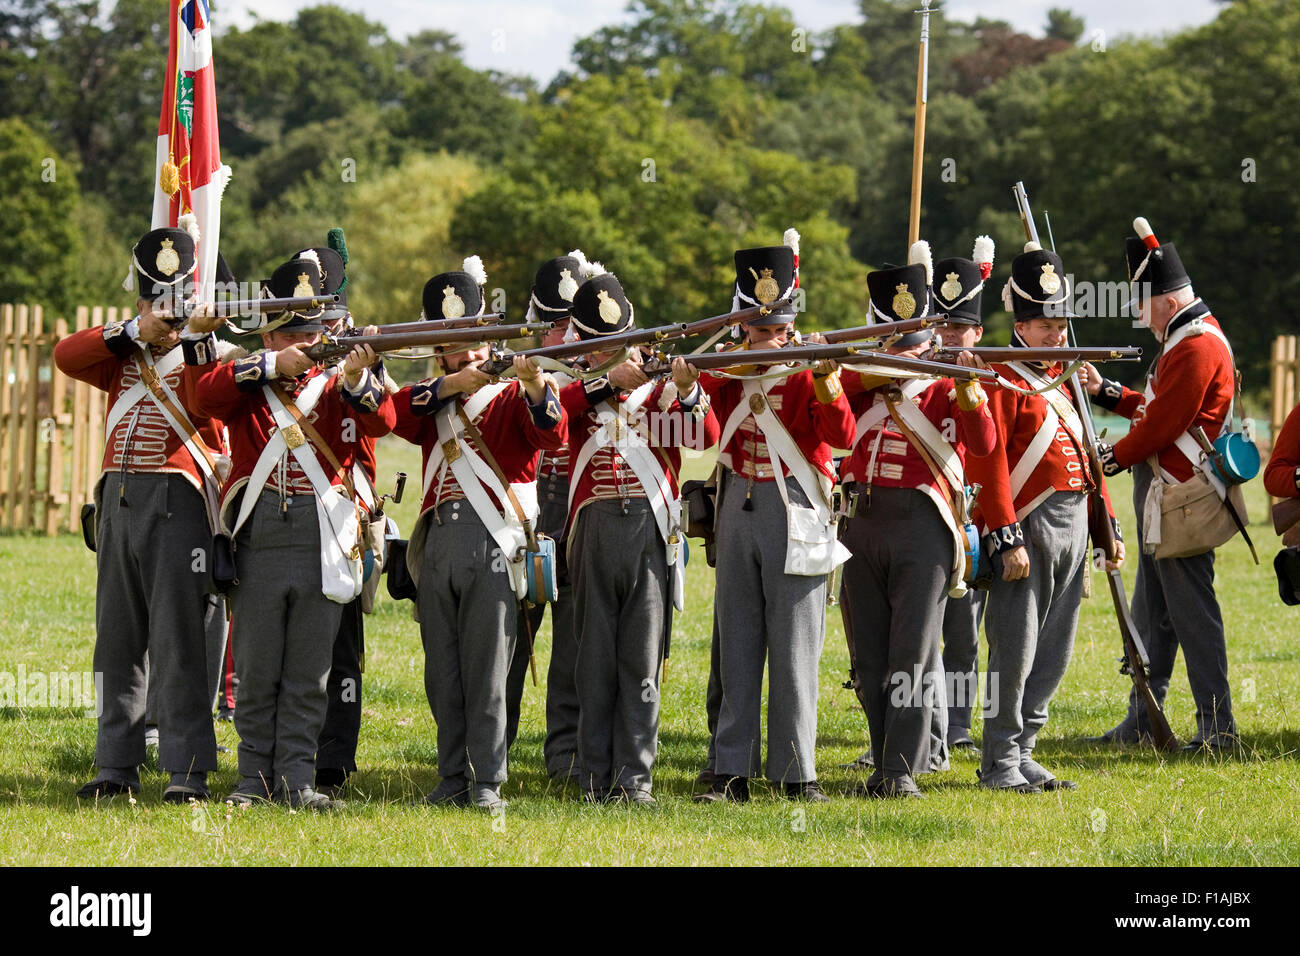 Reenactment of the 33rd Regiment foot soldiers going into battle Stock Photo